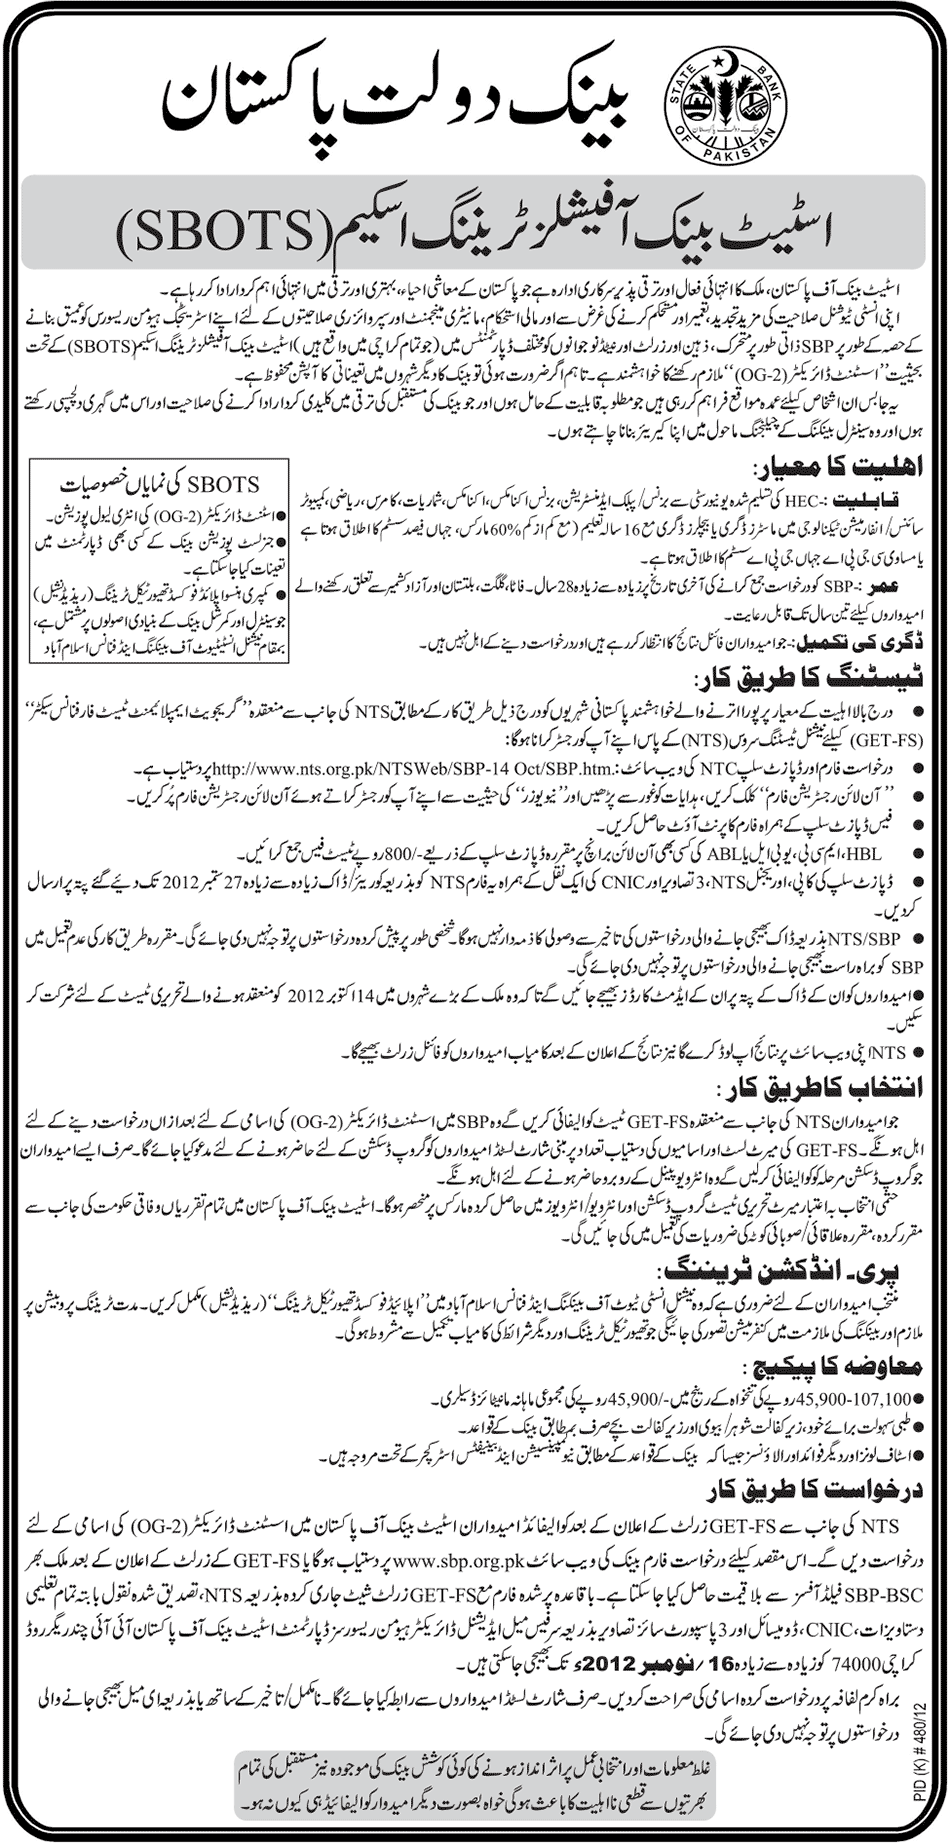 State Bank of Pakistan Requires OG-2 Assistant Director (Government job)